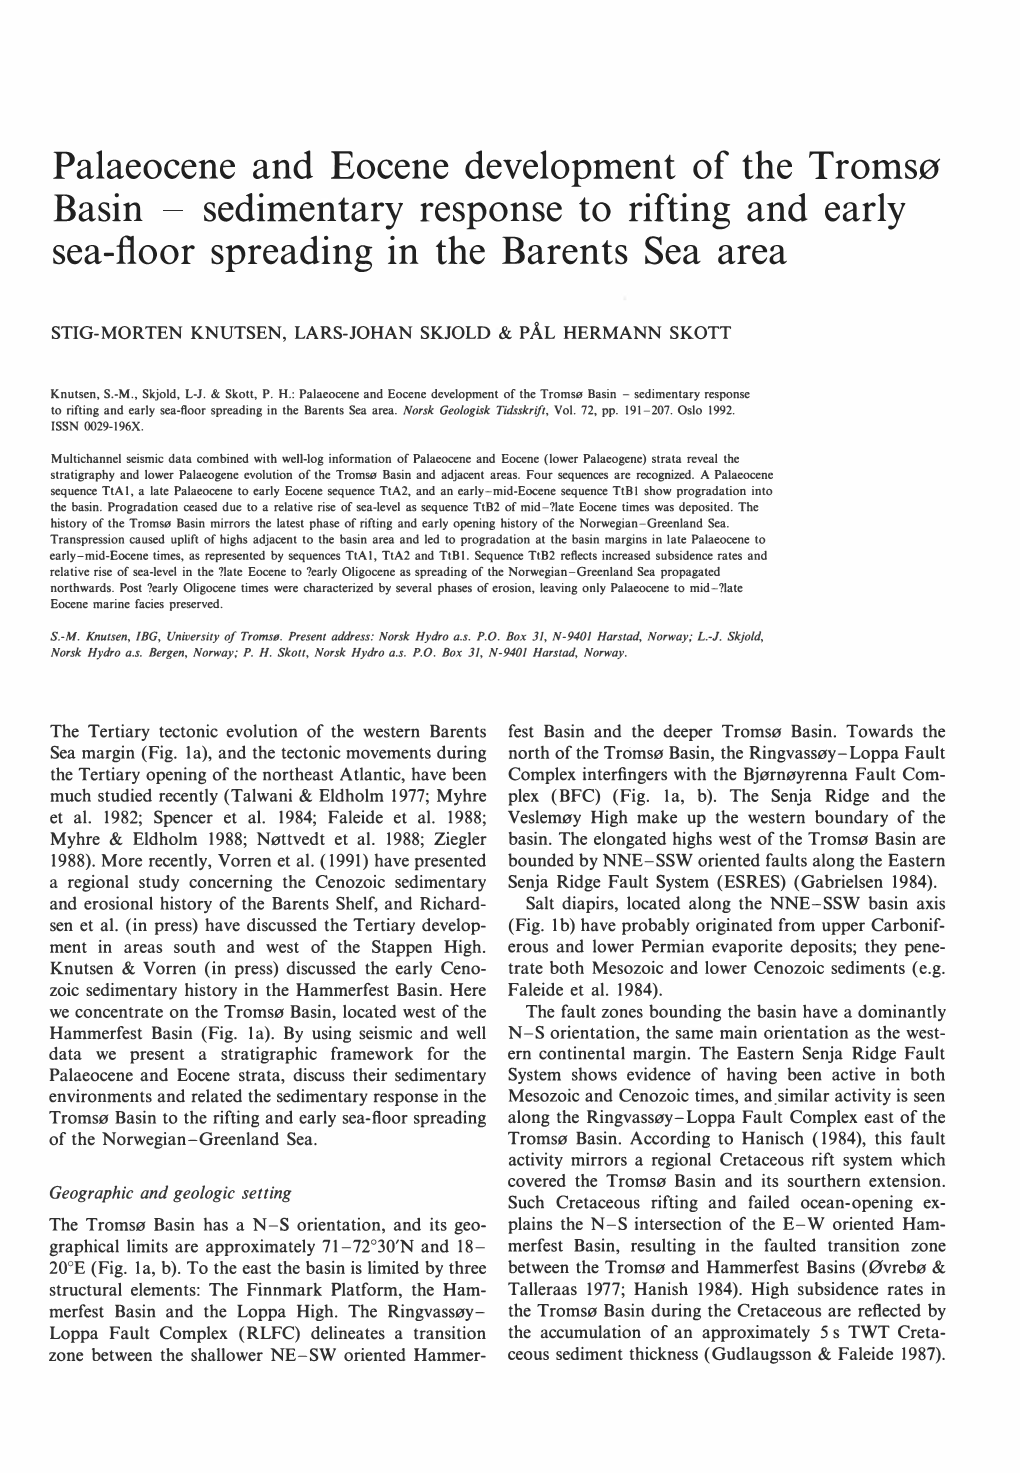 Palaeocene and Eocene Development of the Tromsø Basin Sedimentary Response to Rifting and Early Sea-Floor Spreading in the Barents Sea Area